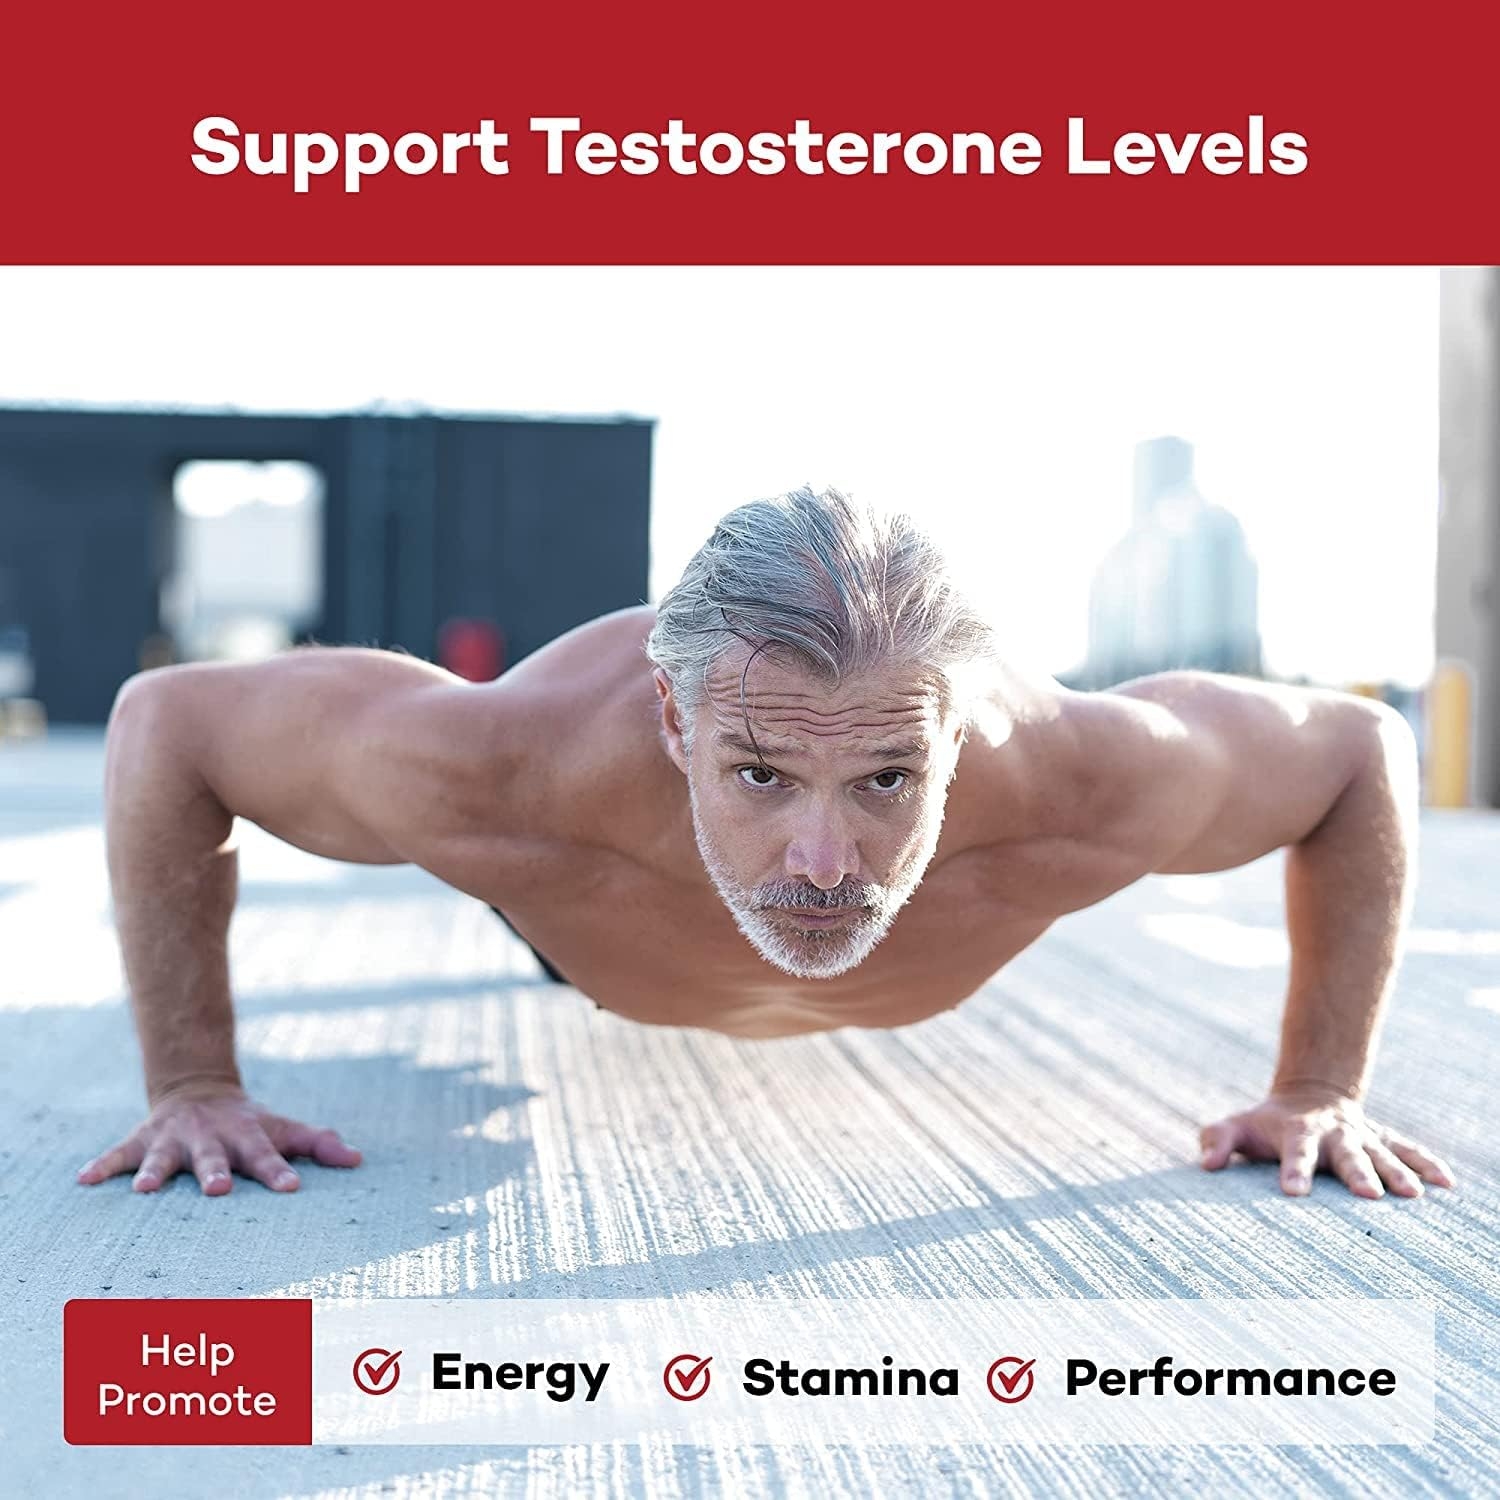 REX MD Testosterone Support Supplement for Men | Formulated to Help Support Energy, Stamina, Performance | Natural Ingredients Including Fenugreek Help Support Body's Testosterone Levels, 3 Pack!